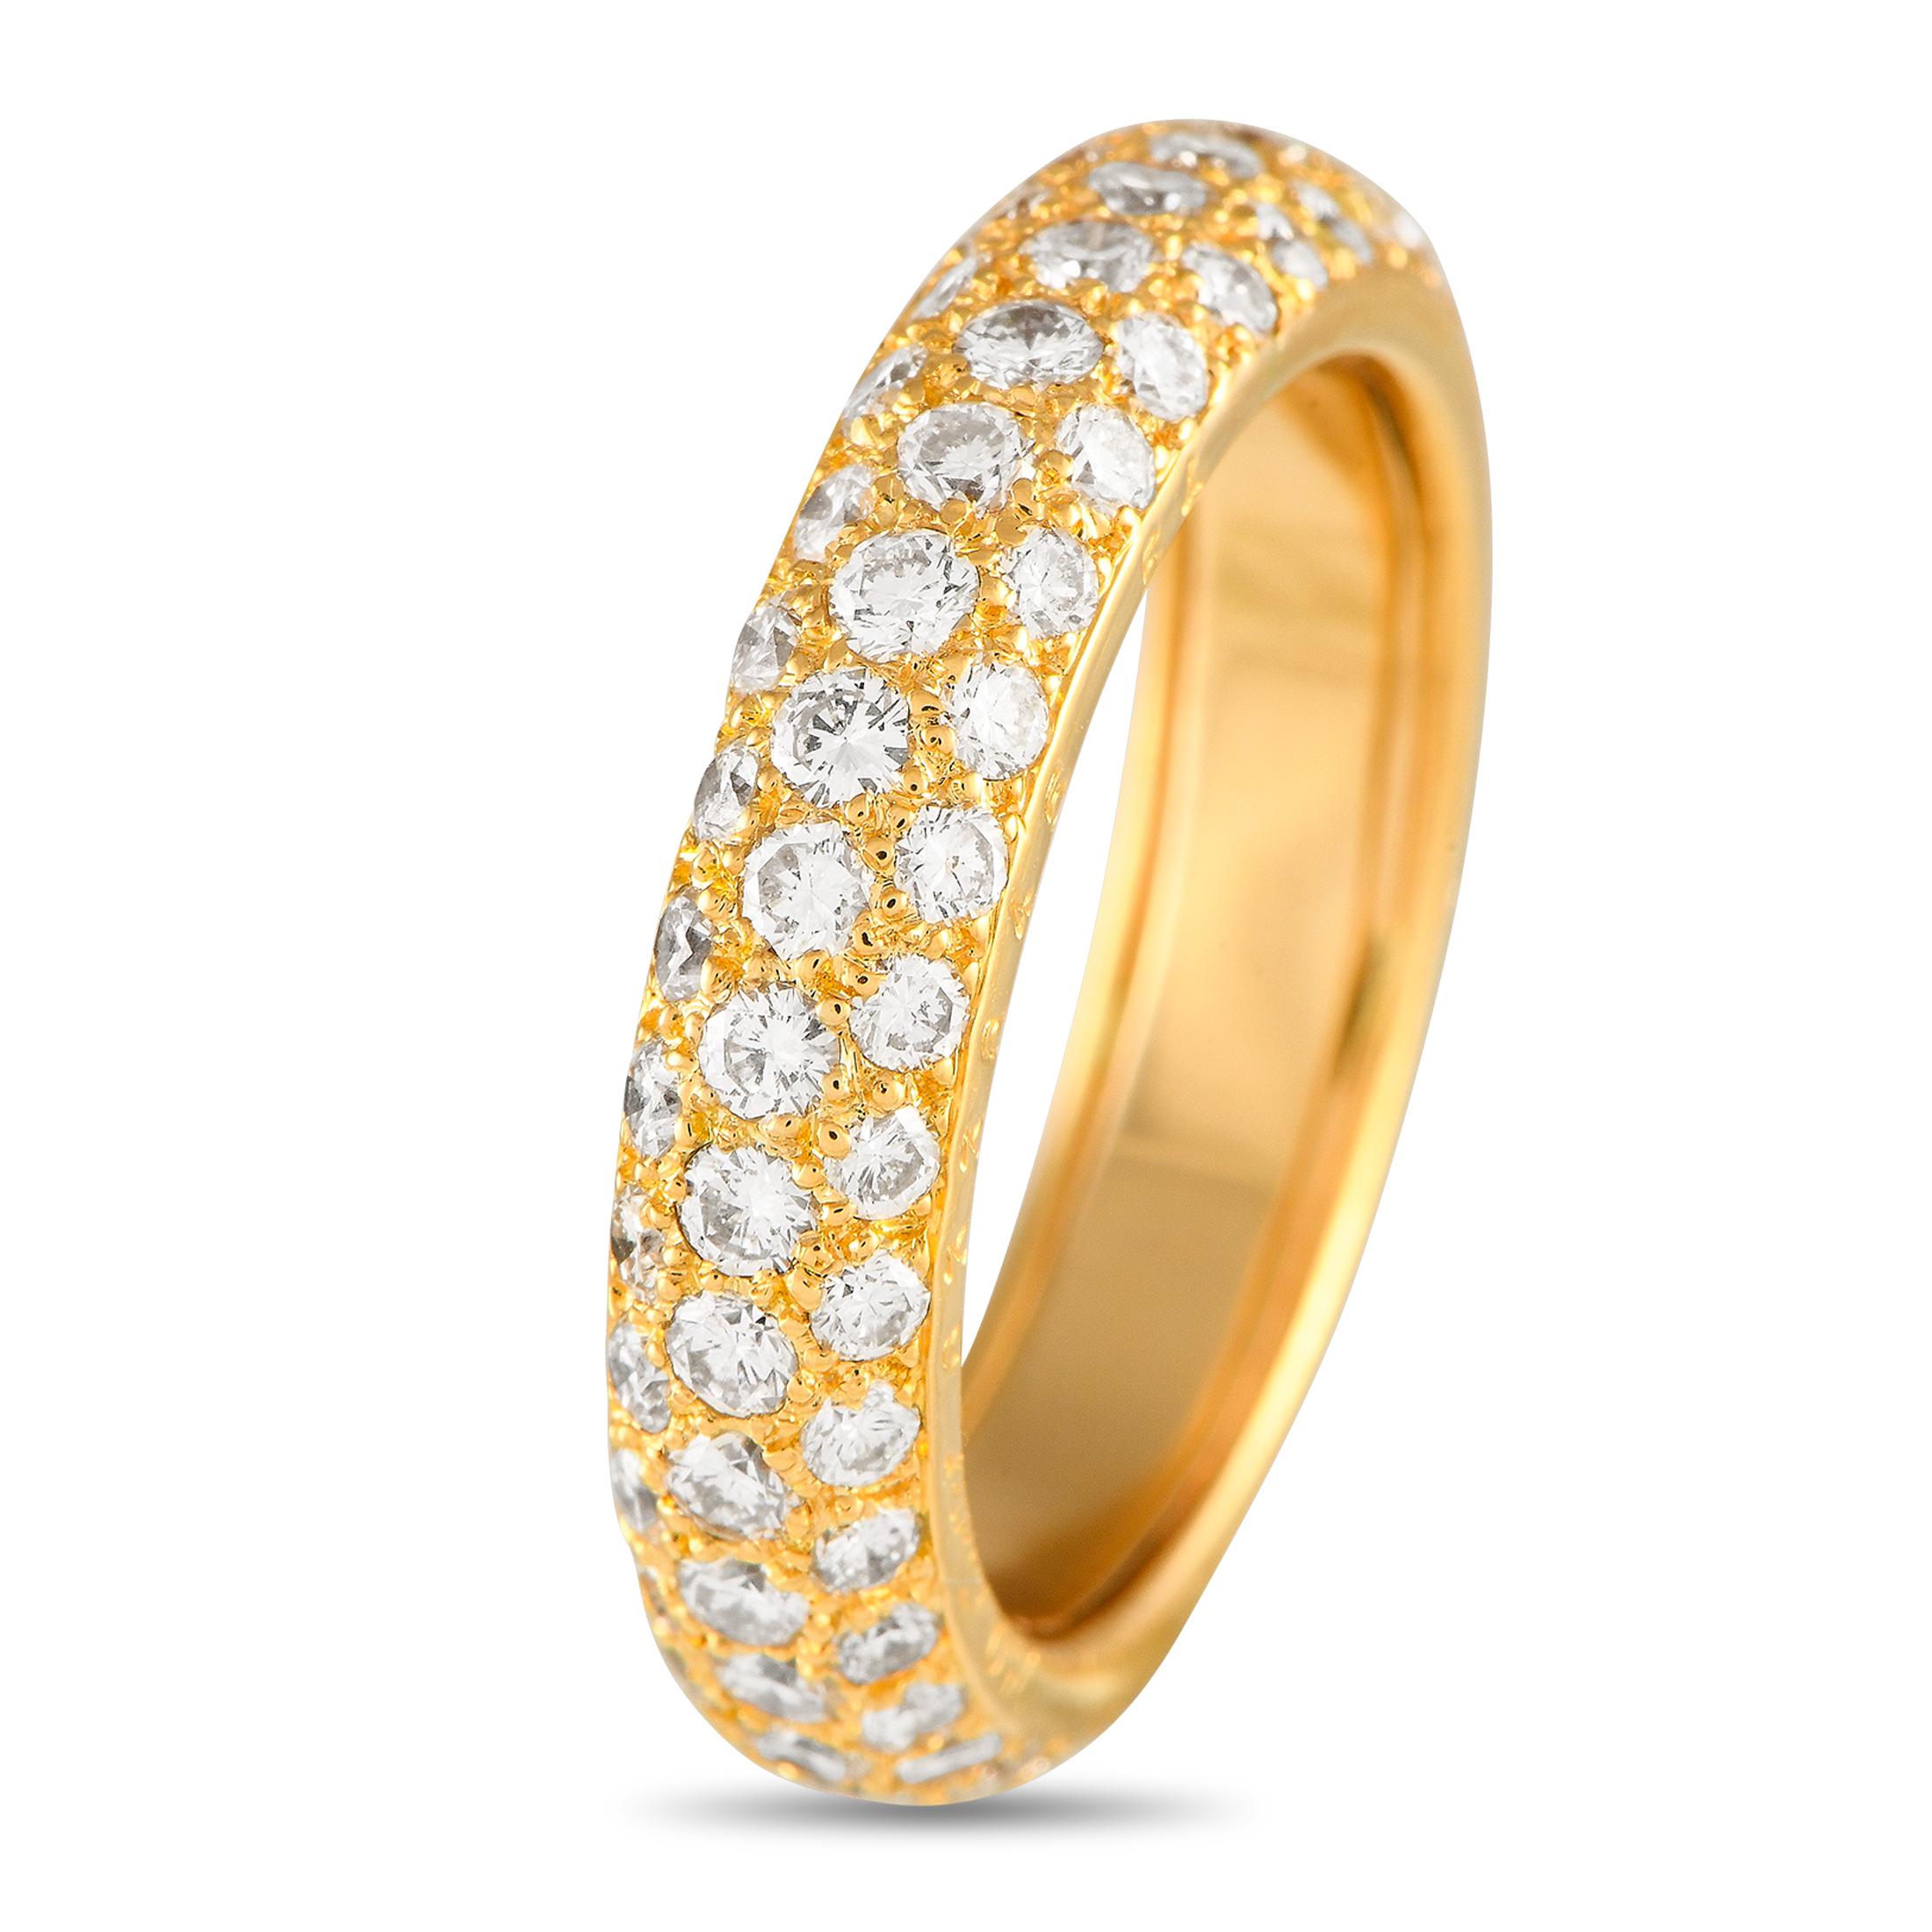 This Cartier band ring is simple, elegant, and understated. The sleek 18K Yellow Gold setting measures 4mm wide and features a 3mm top height, making it ideal for everyday wear. Diamonds with a total weight of 1.20 carats provide the perfect amount